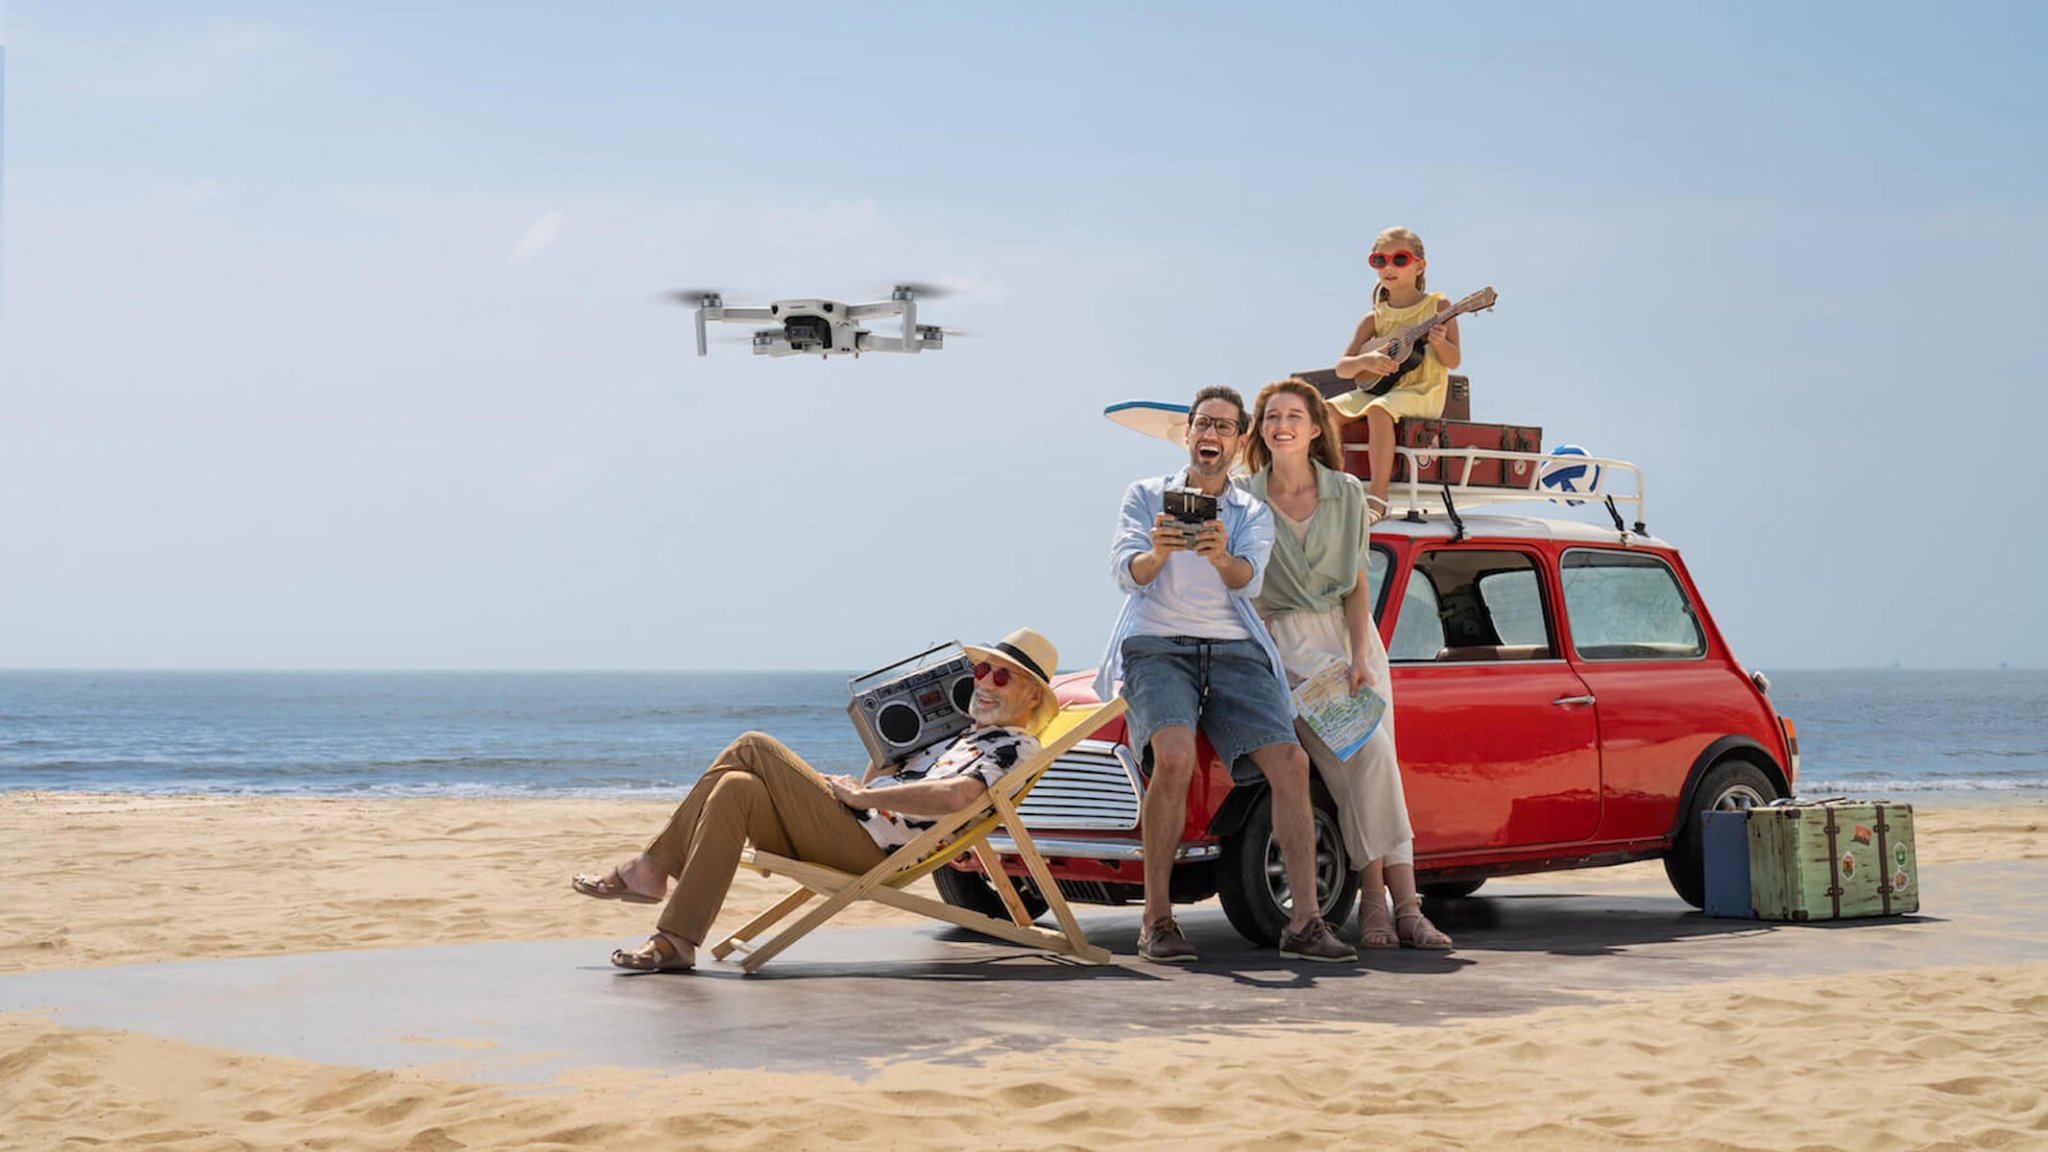 Best drones to buy: professional, camera, toy, and more